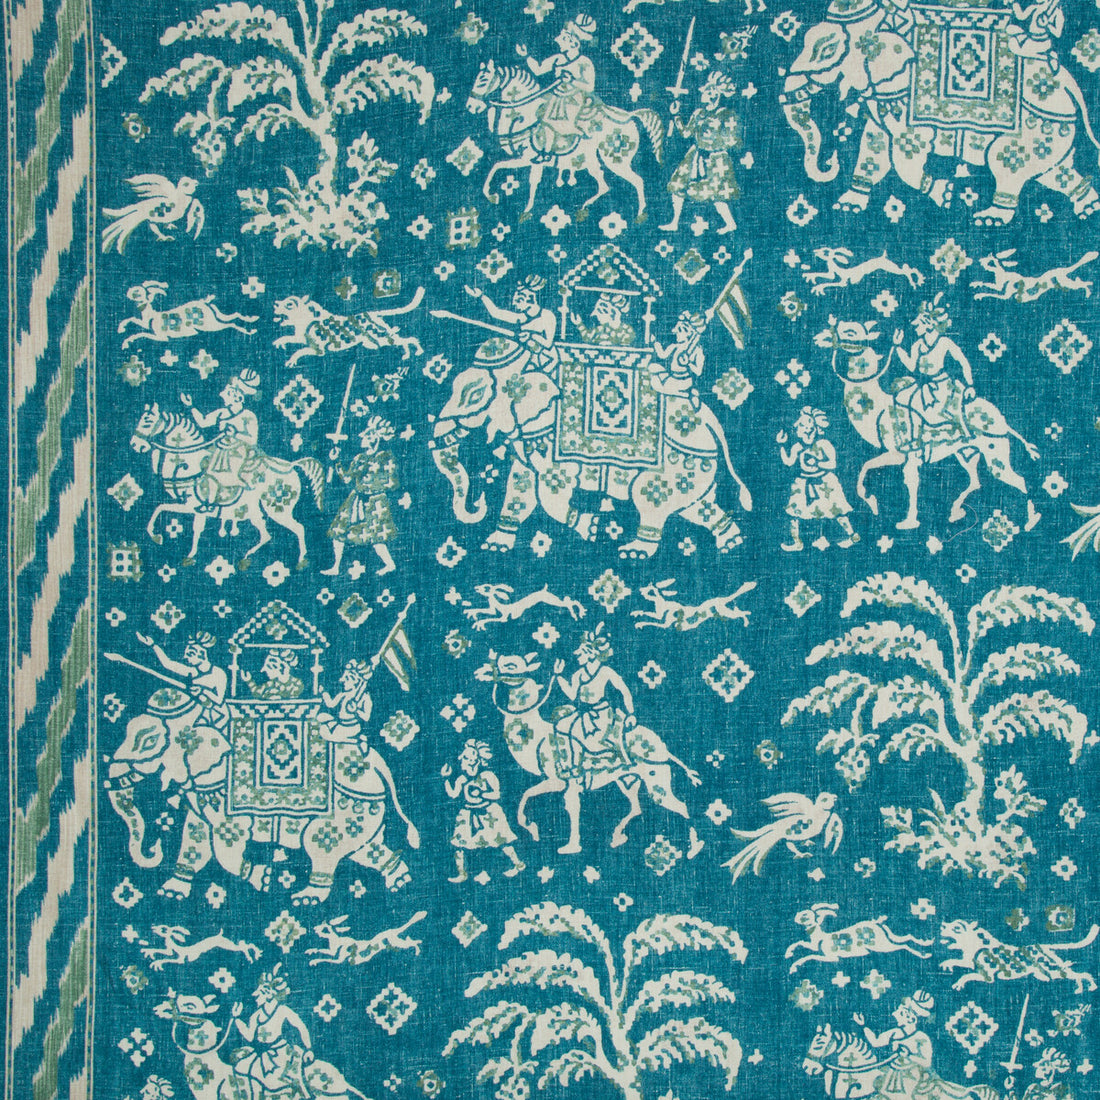 Aralam Print fabric in teal/green color - pattern 8015175.133.0 - by Brunschwig &amp; Fils in the Cape Comorin collection